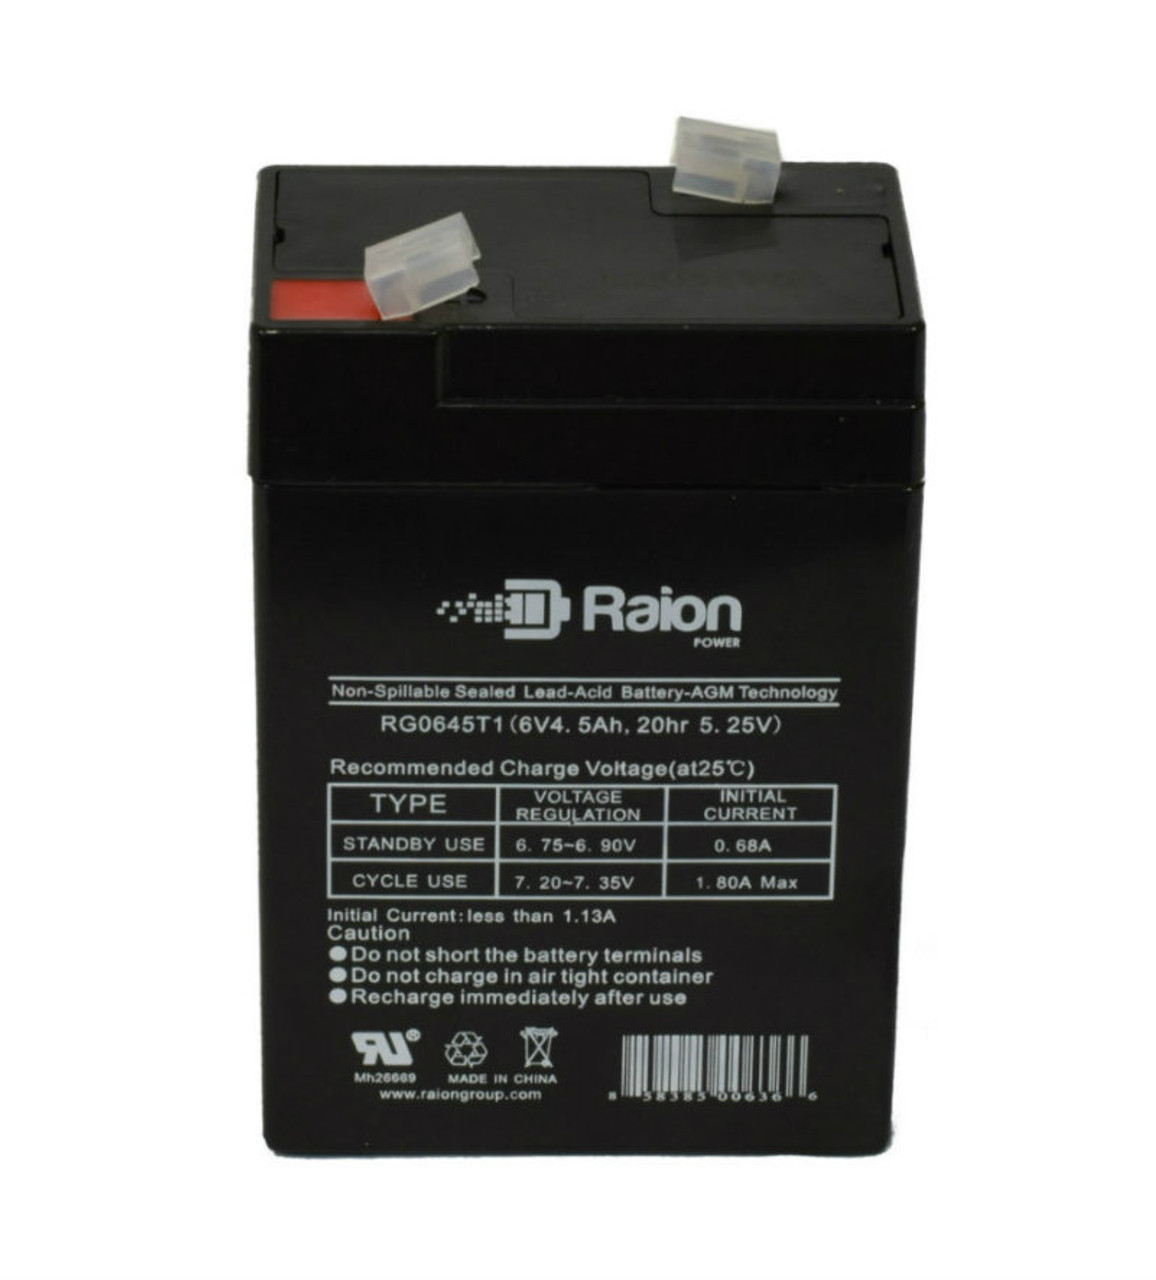 Raion Power RG0645T1 Replacement Battery Cartridge for Discover D650